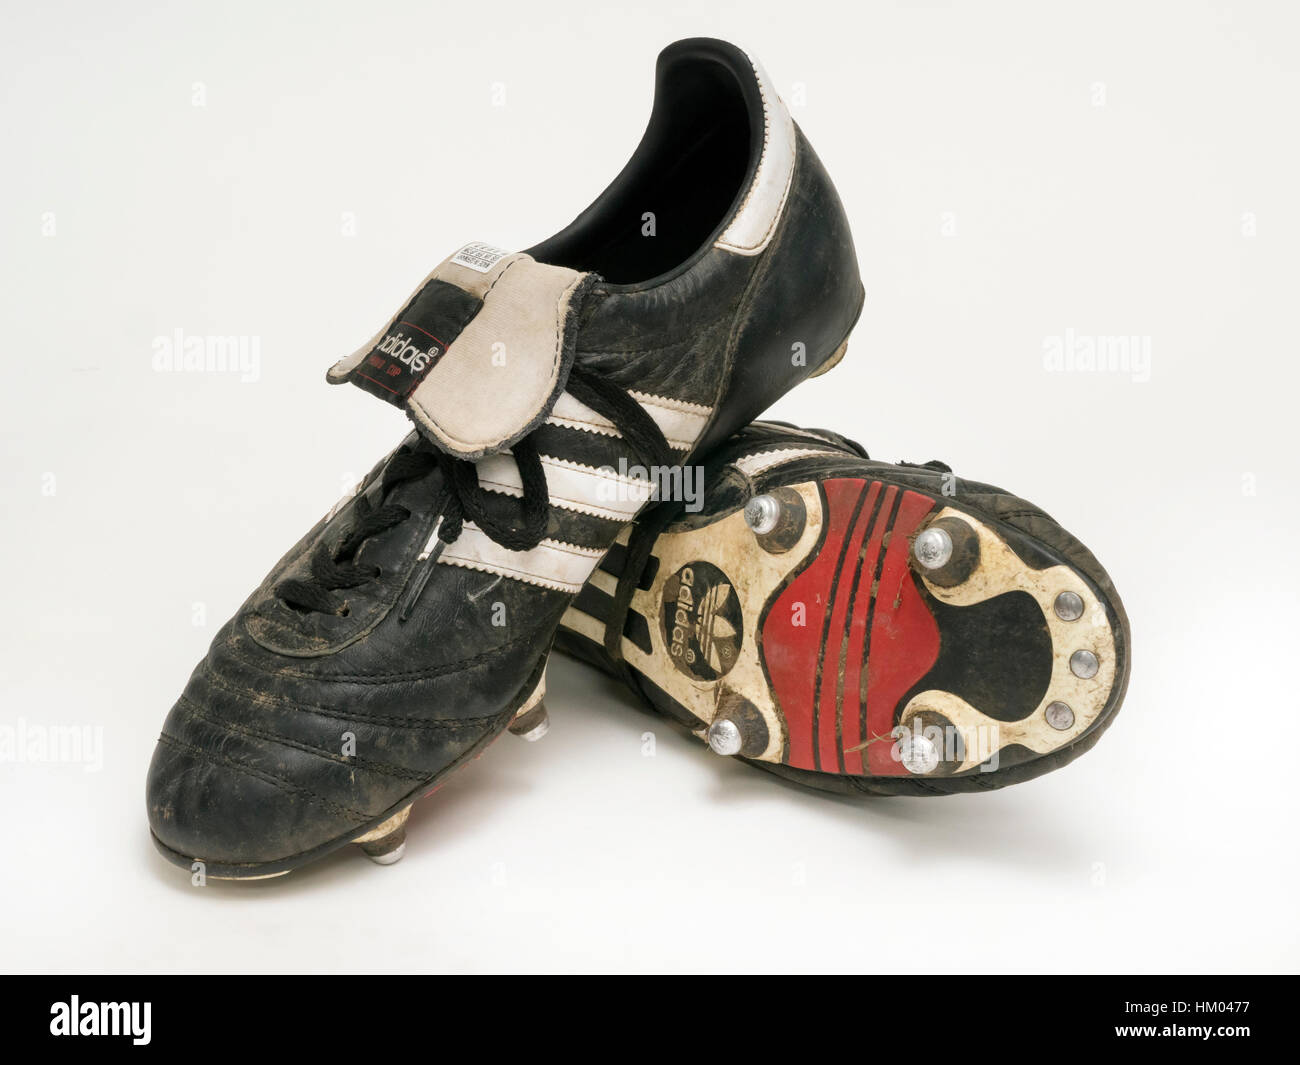 Addidas World Cup football boots. Stock Photo